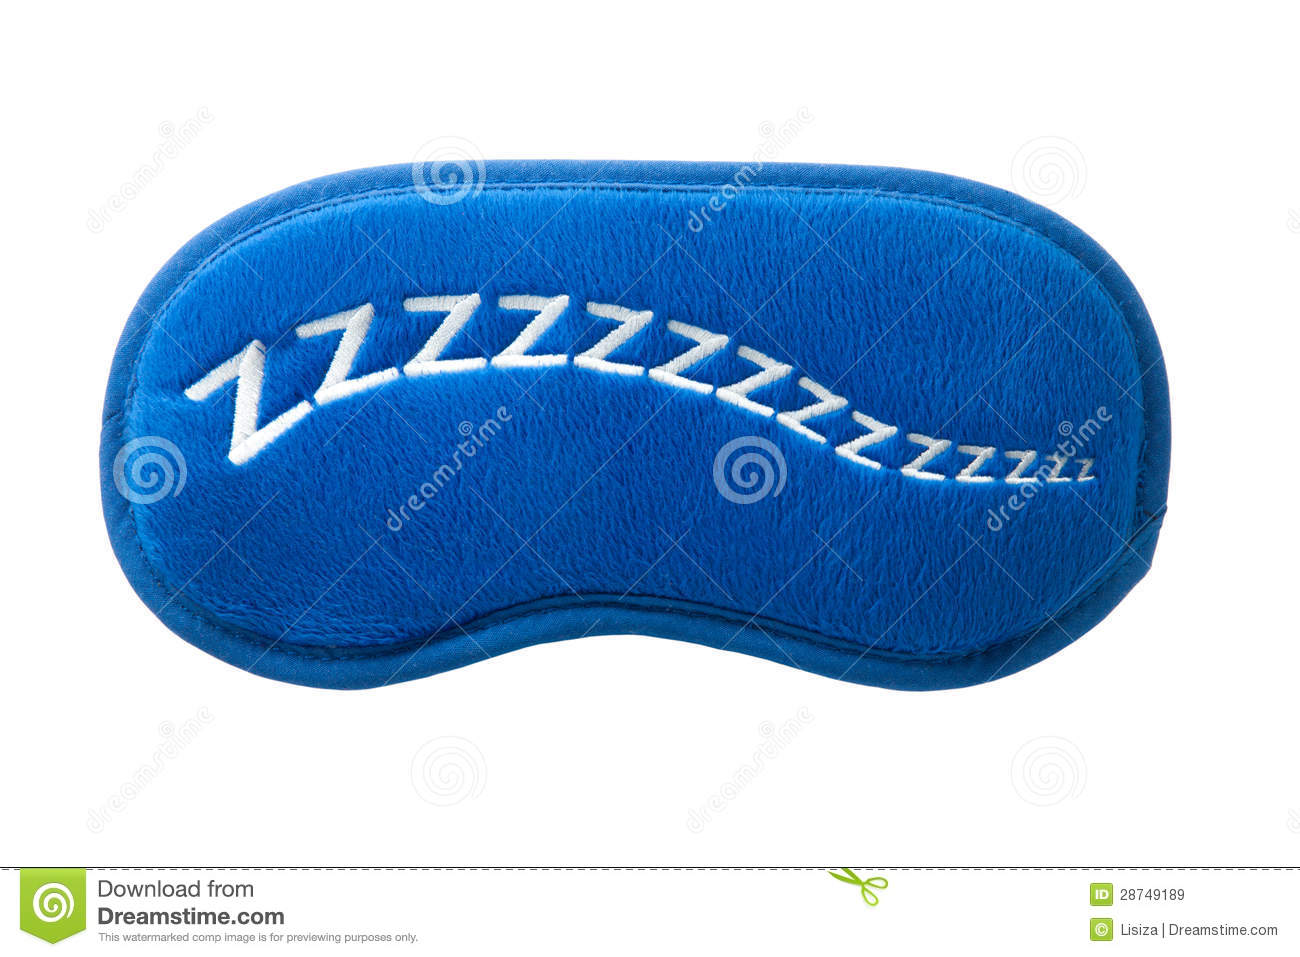 Blue Sleep Mask With Sign Zzzzz Royalty Free Stock Images   Image